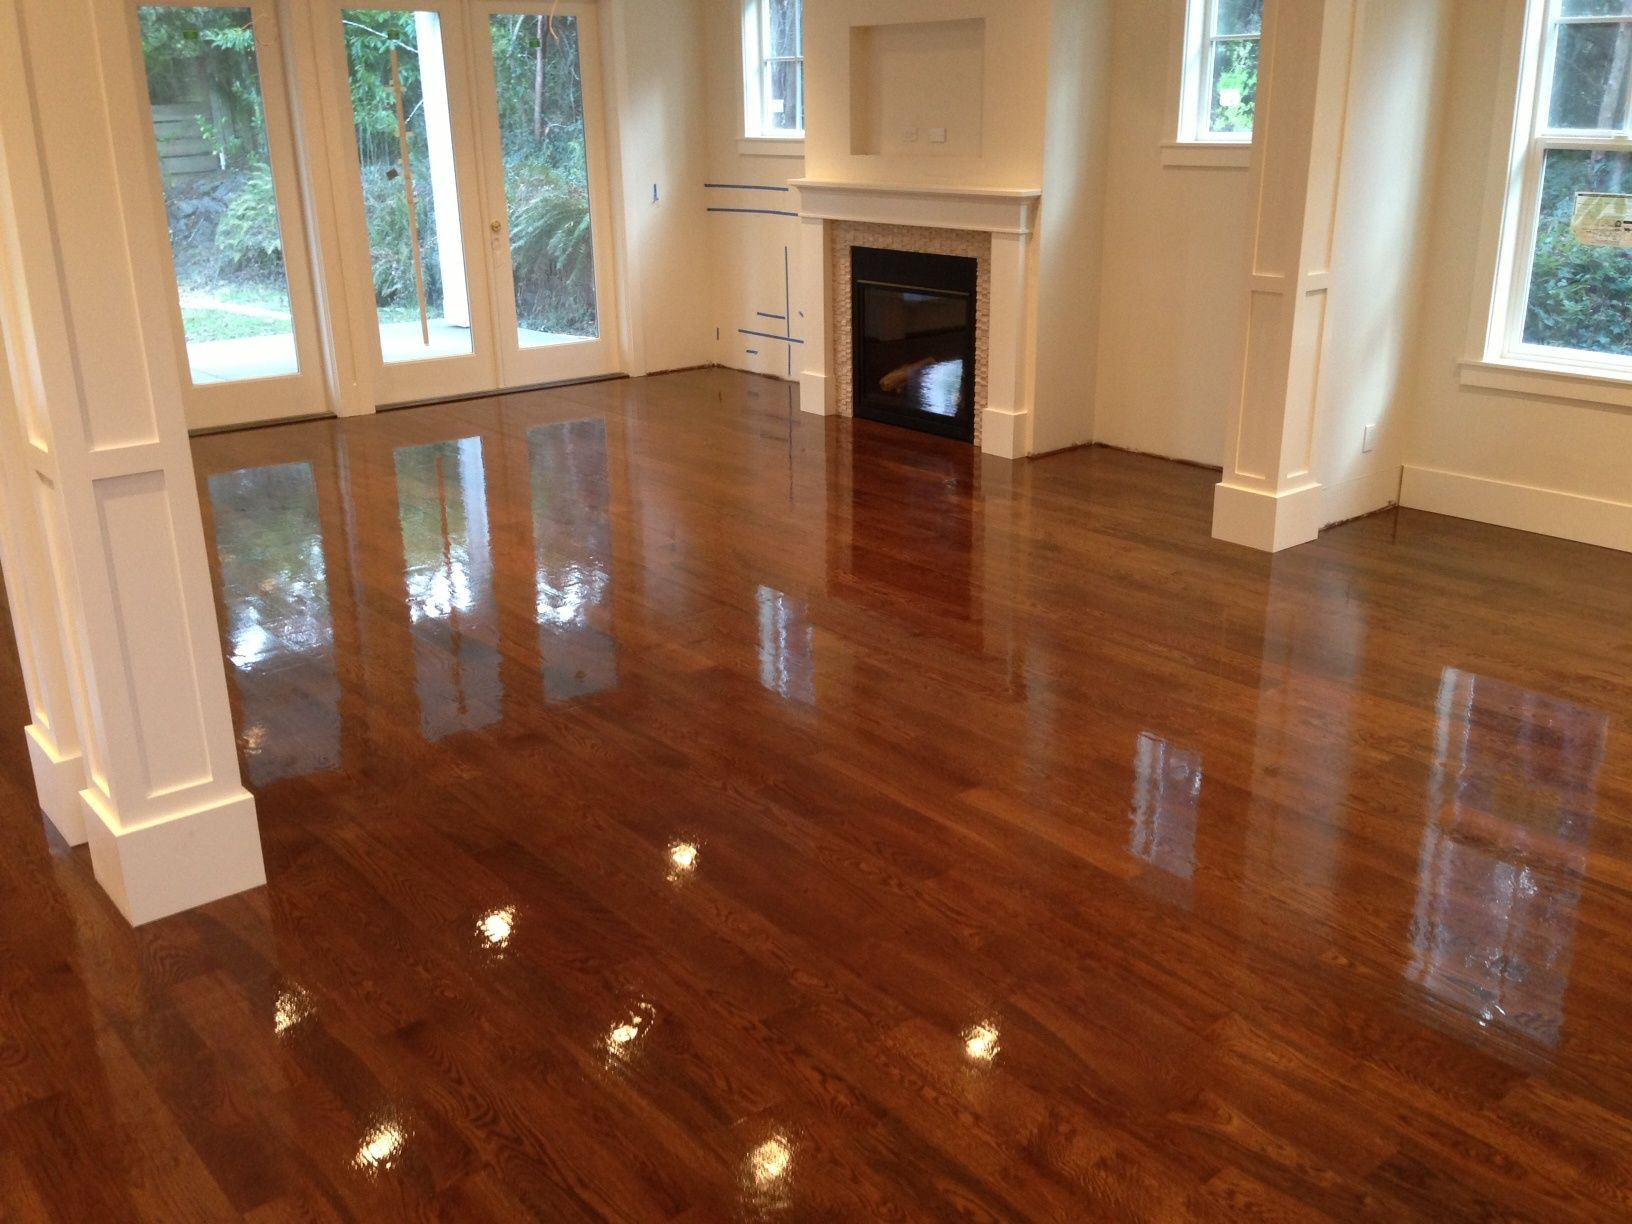 17 Stunning Hardwood Floor Refinishing Chattanooga Tn 2023 free download hardwood floor refinishing chattanooga tn of hardwood floor outlet floor plan ideas intended for hardwood floor outlet express flooring has outlets in glendale tucson and all neighboring